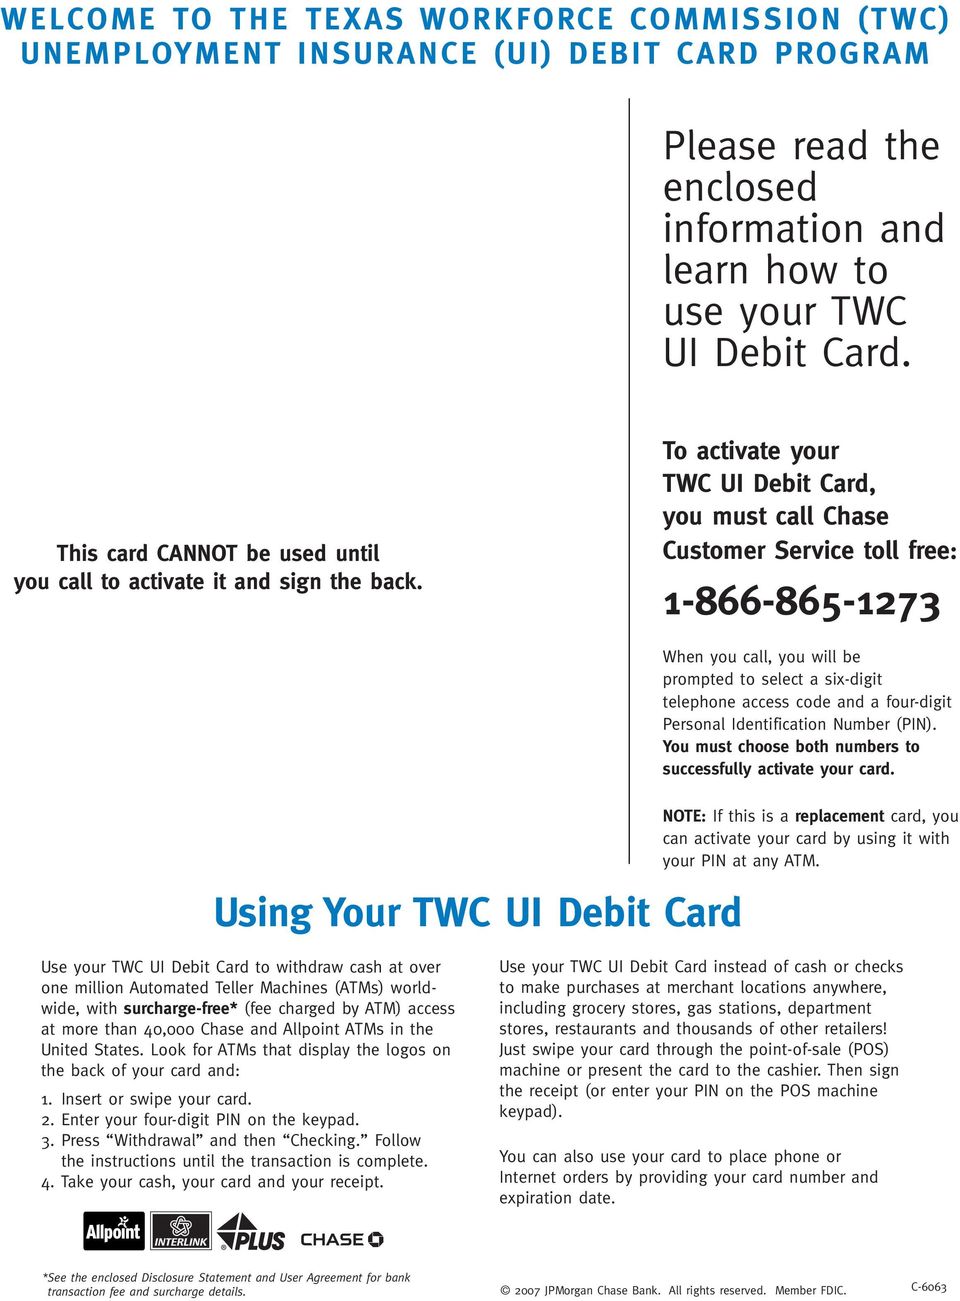 To activate your TWC UI Debit Card, you must call Chase Customer Service toll free: 1-866-865-1273 When you call, you will be prompted to select a six-digit telephone access code and a four-digit